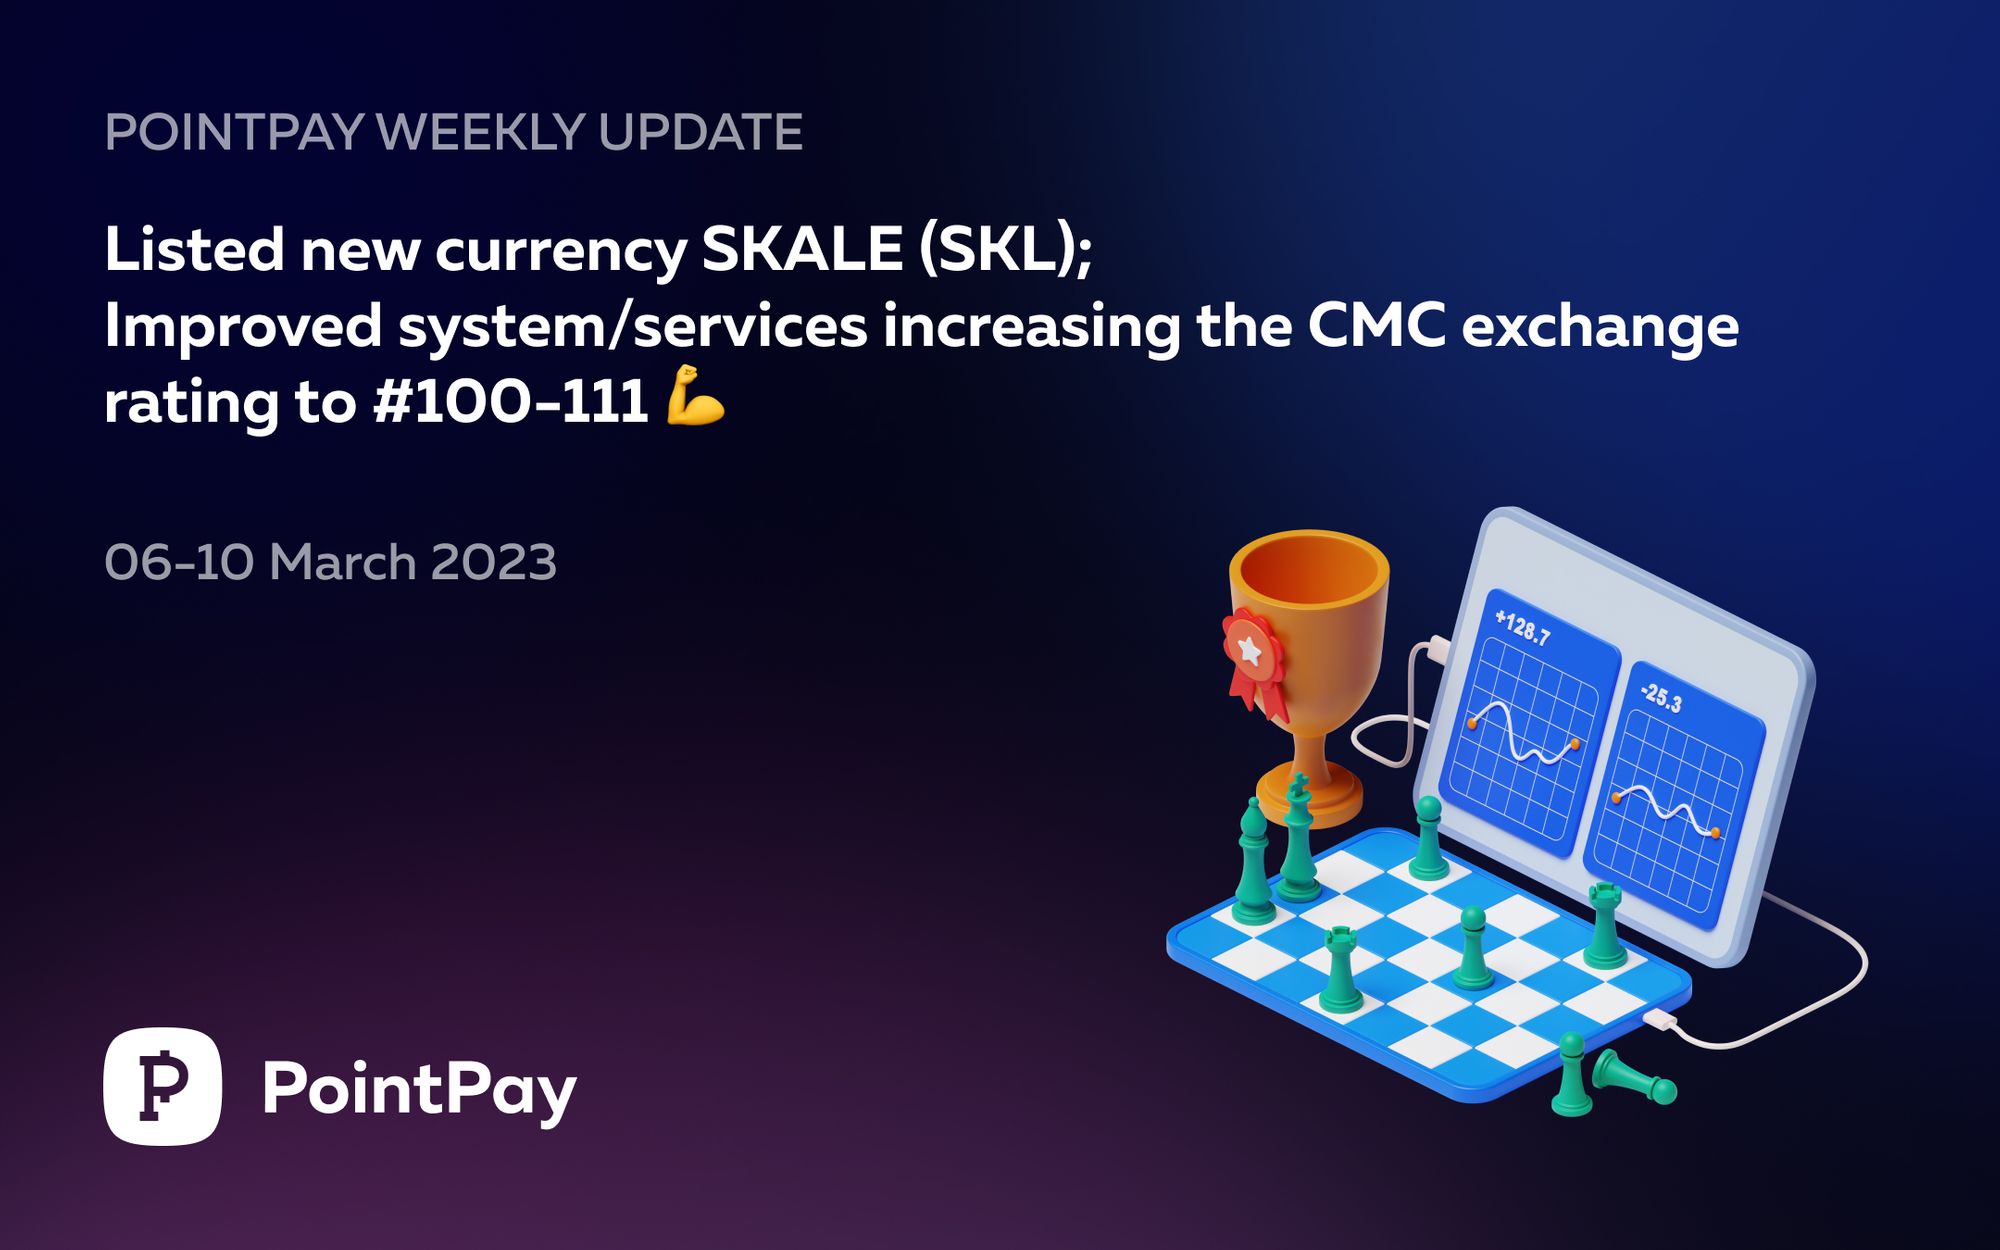 PointPay Weekly Update (6 - 10 March 2023)